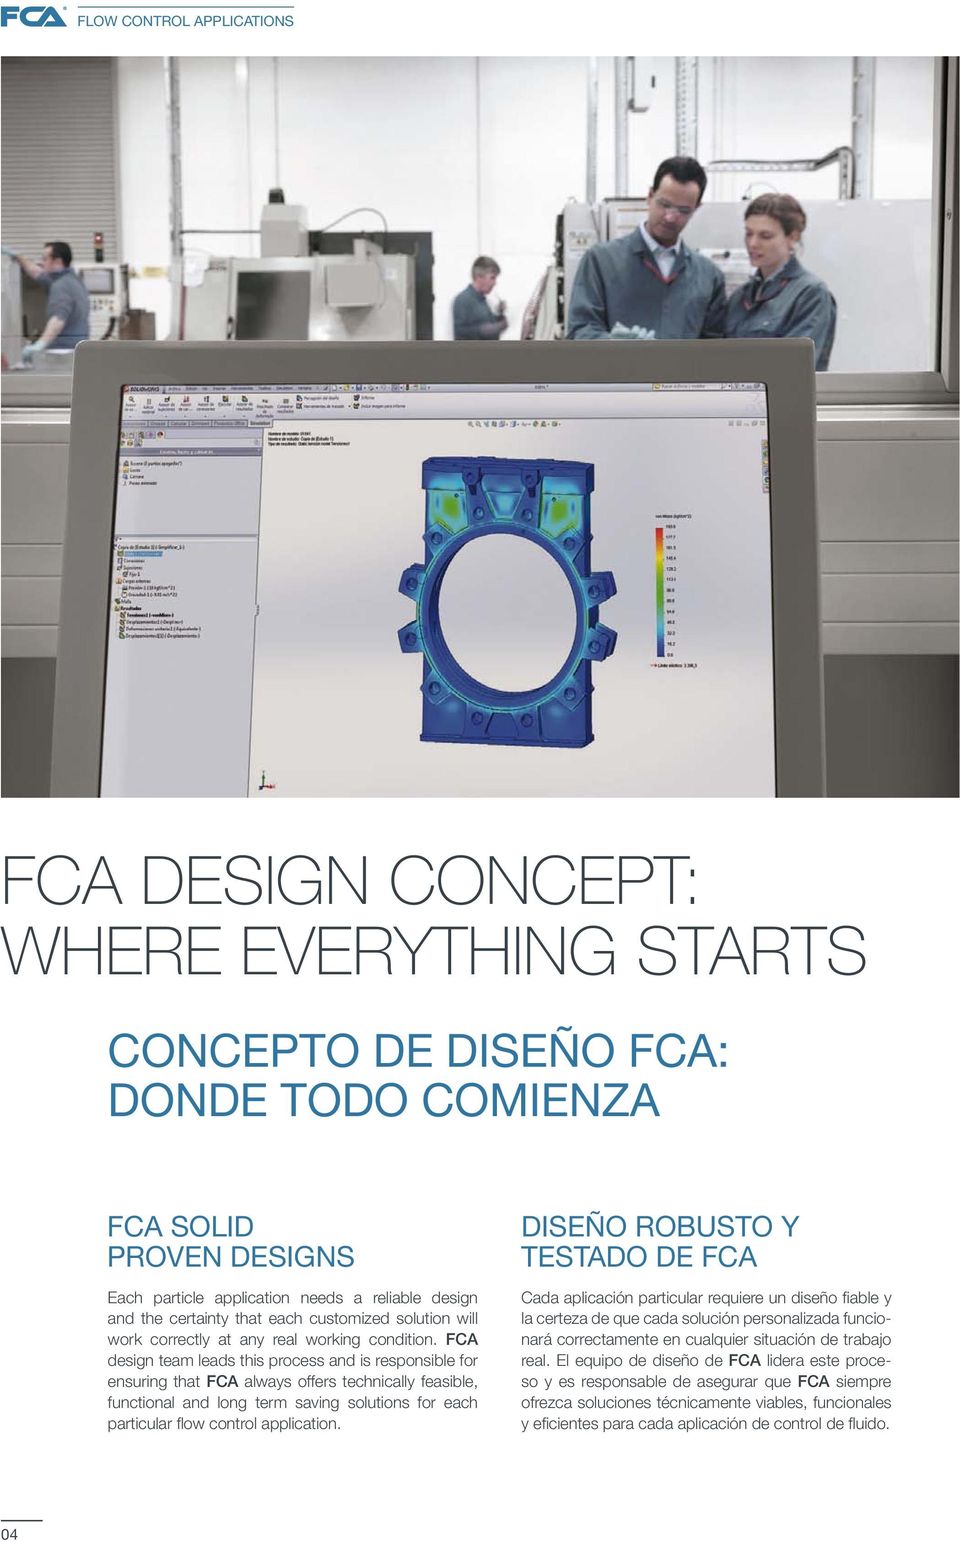 FCA design team leads this process and is responsible for ensuring that FCA always offers technically feasible, functional and long term saving solutions for each particular flow control application.